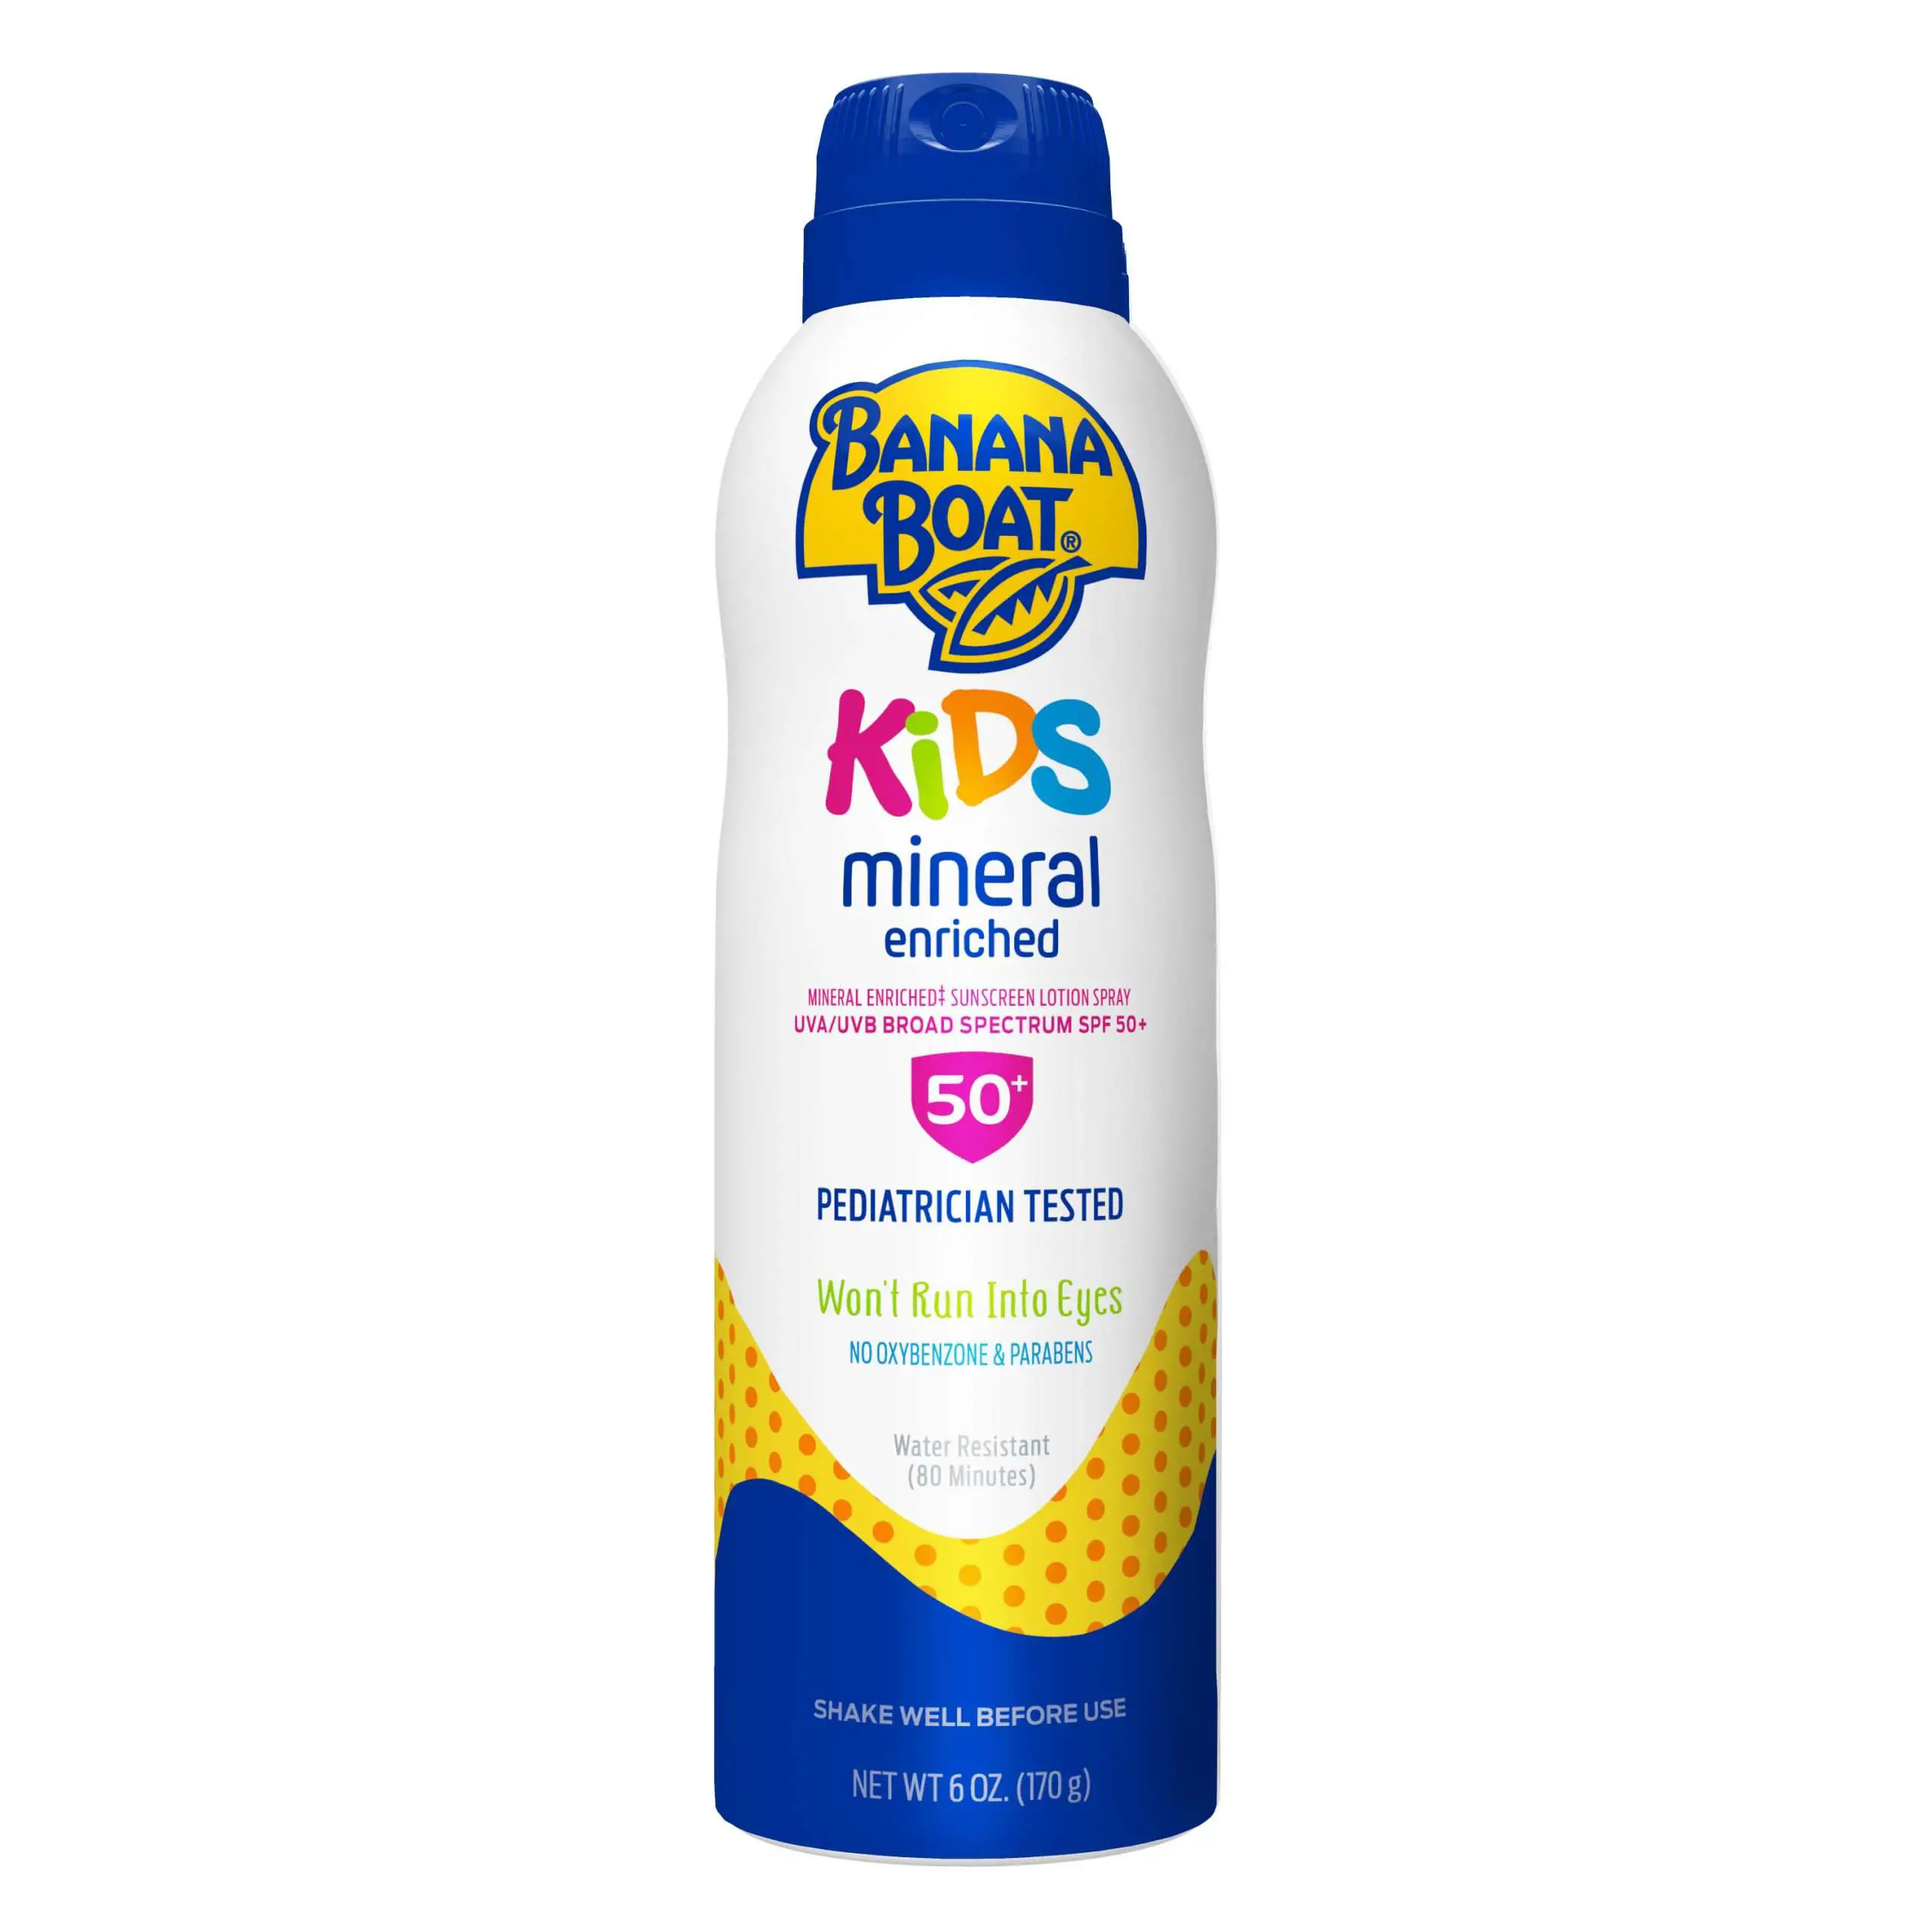 Banana Boat Kids Mineral Enriched Sunscreen Spray SPF 50 ...